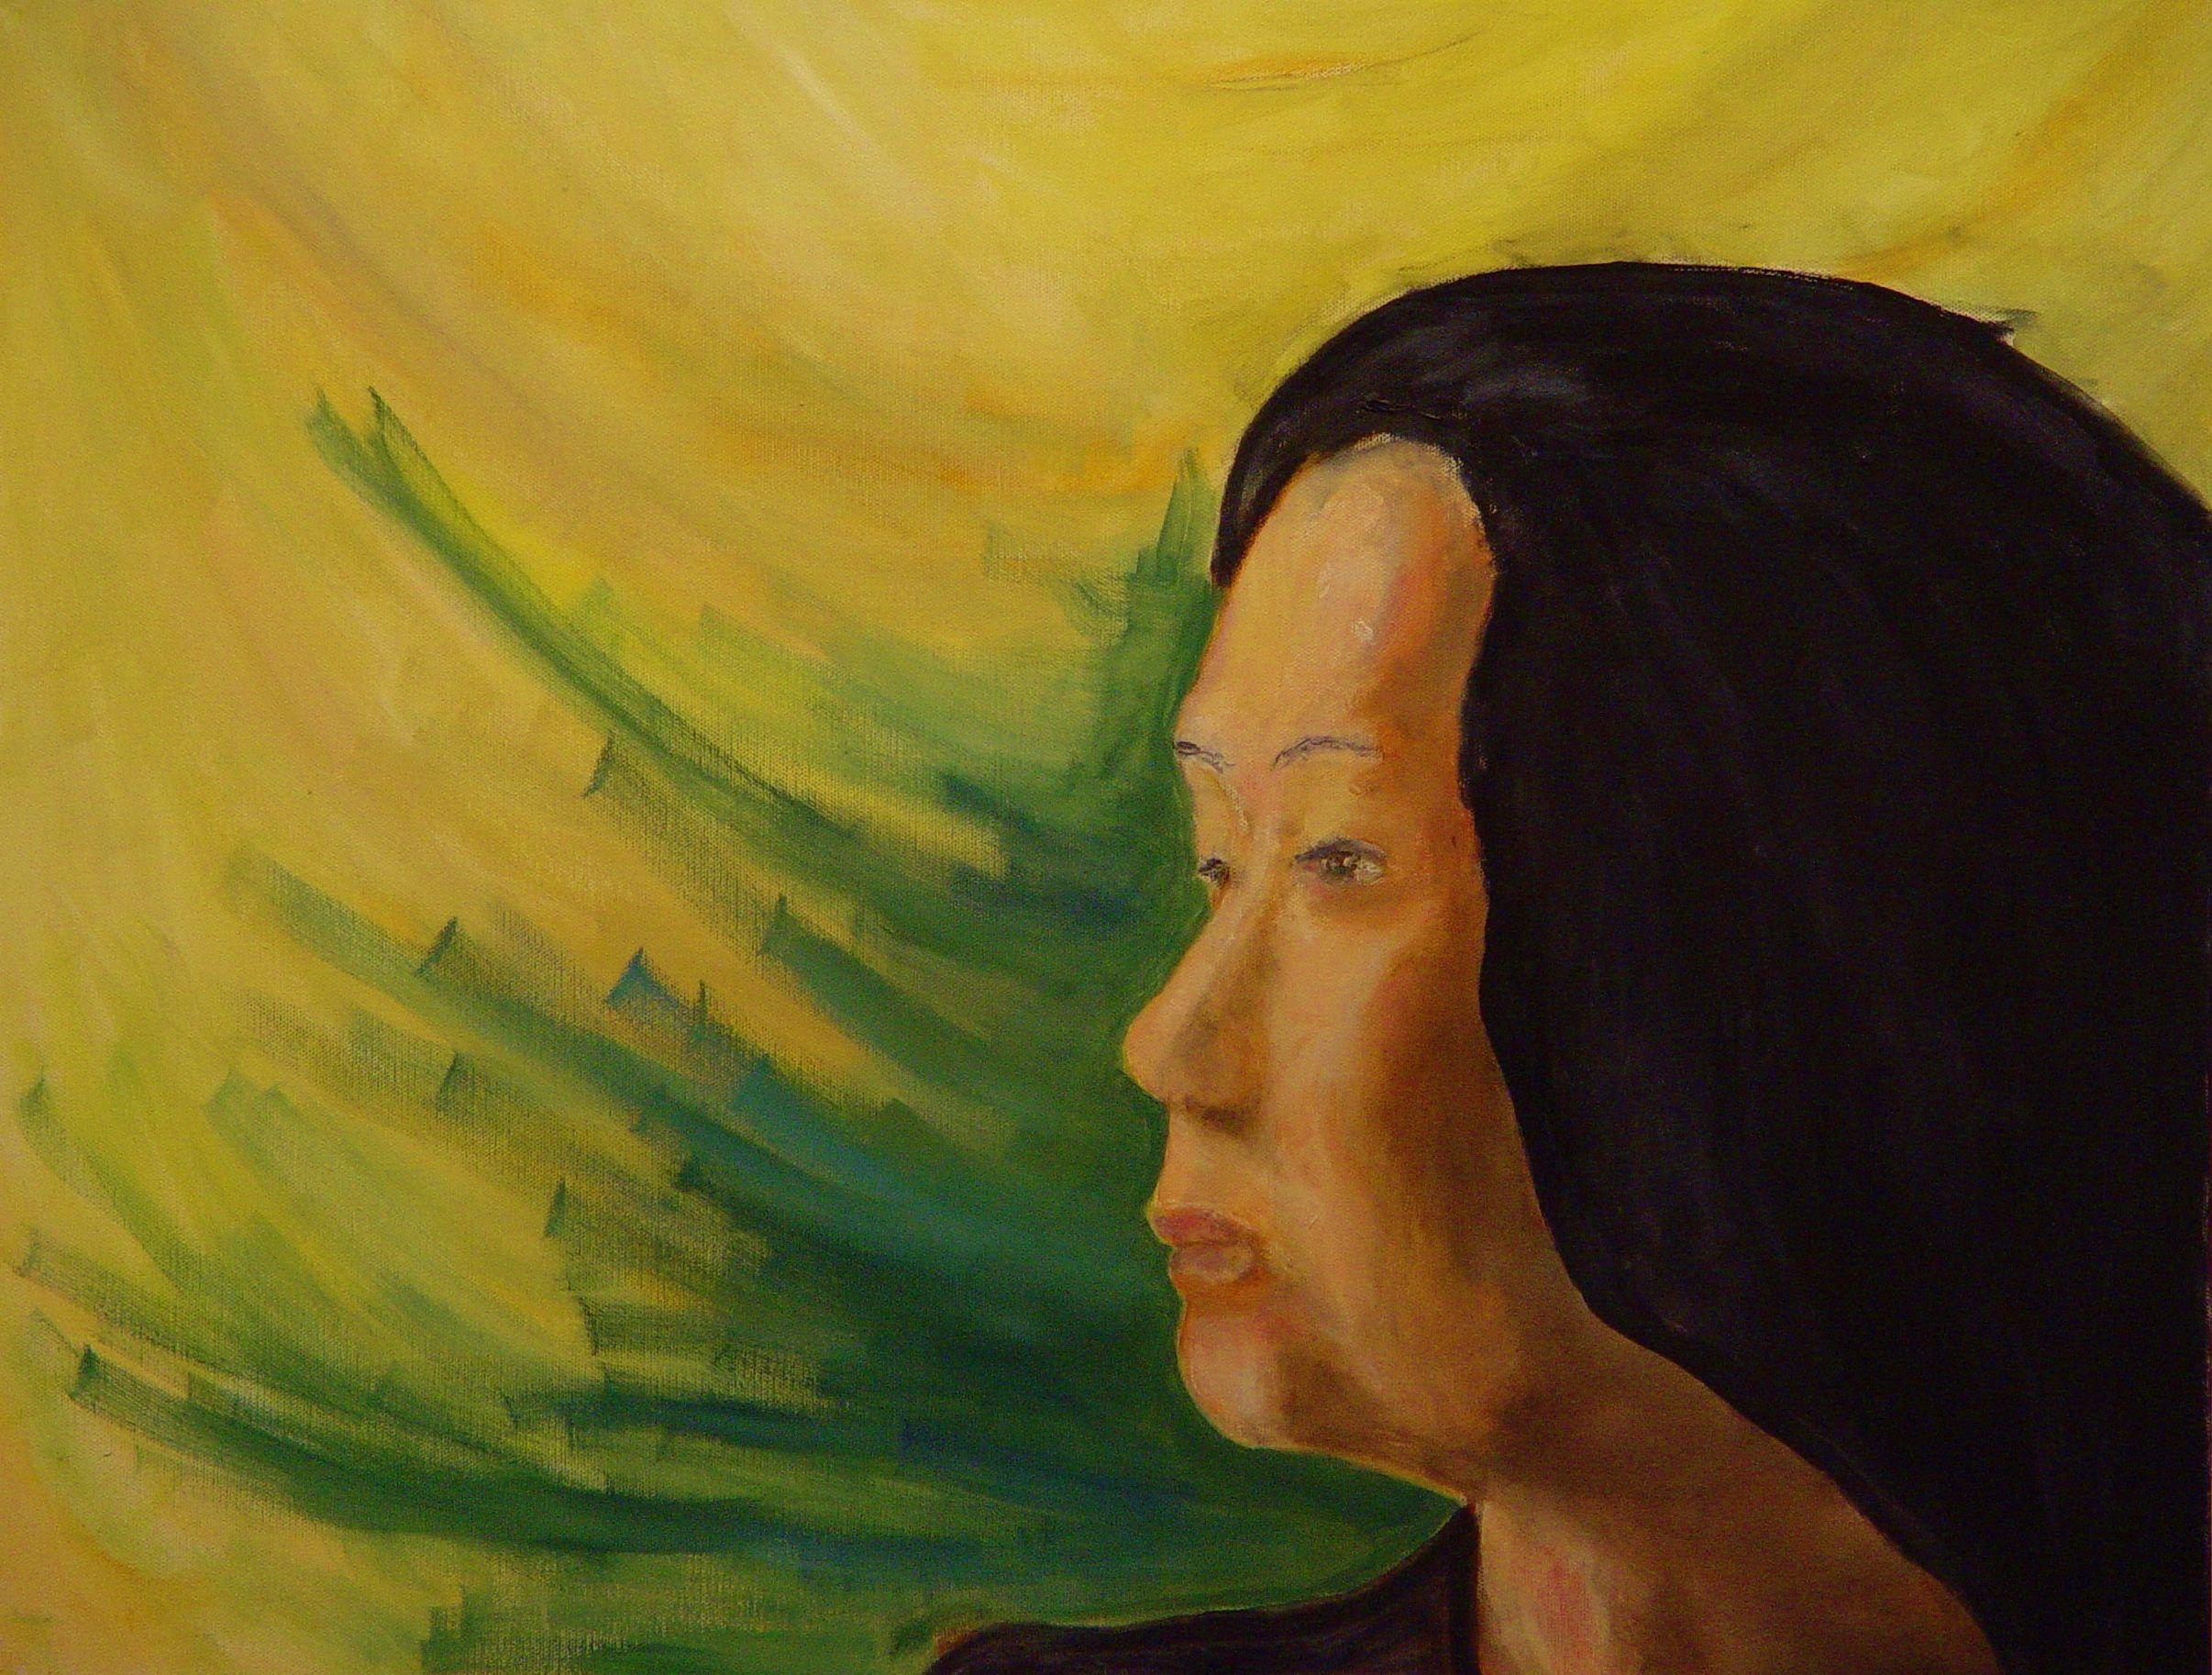 This portrait portrays a woman from the Pacific Islands who has a regal manner.  My portraits combine elements of realism and abstraction.  The woman is presented in profile in a realistic manner.  As I painted her, I thought of a monarch gazing out